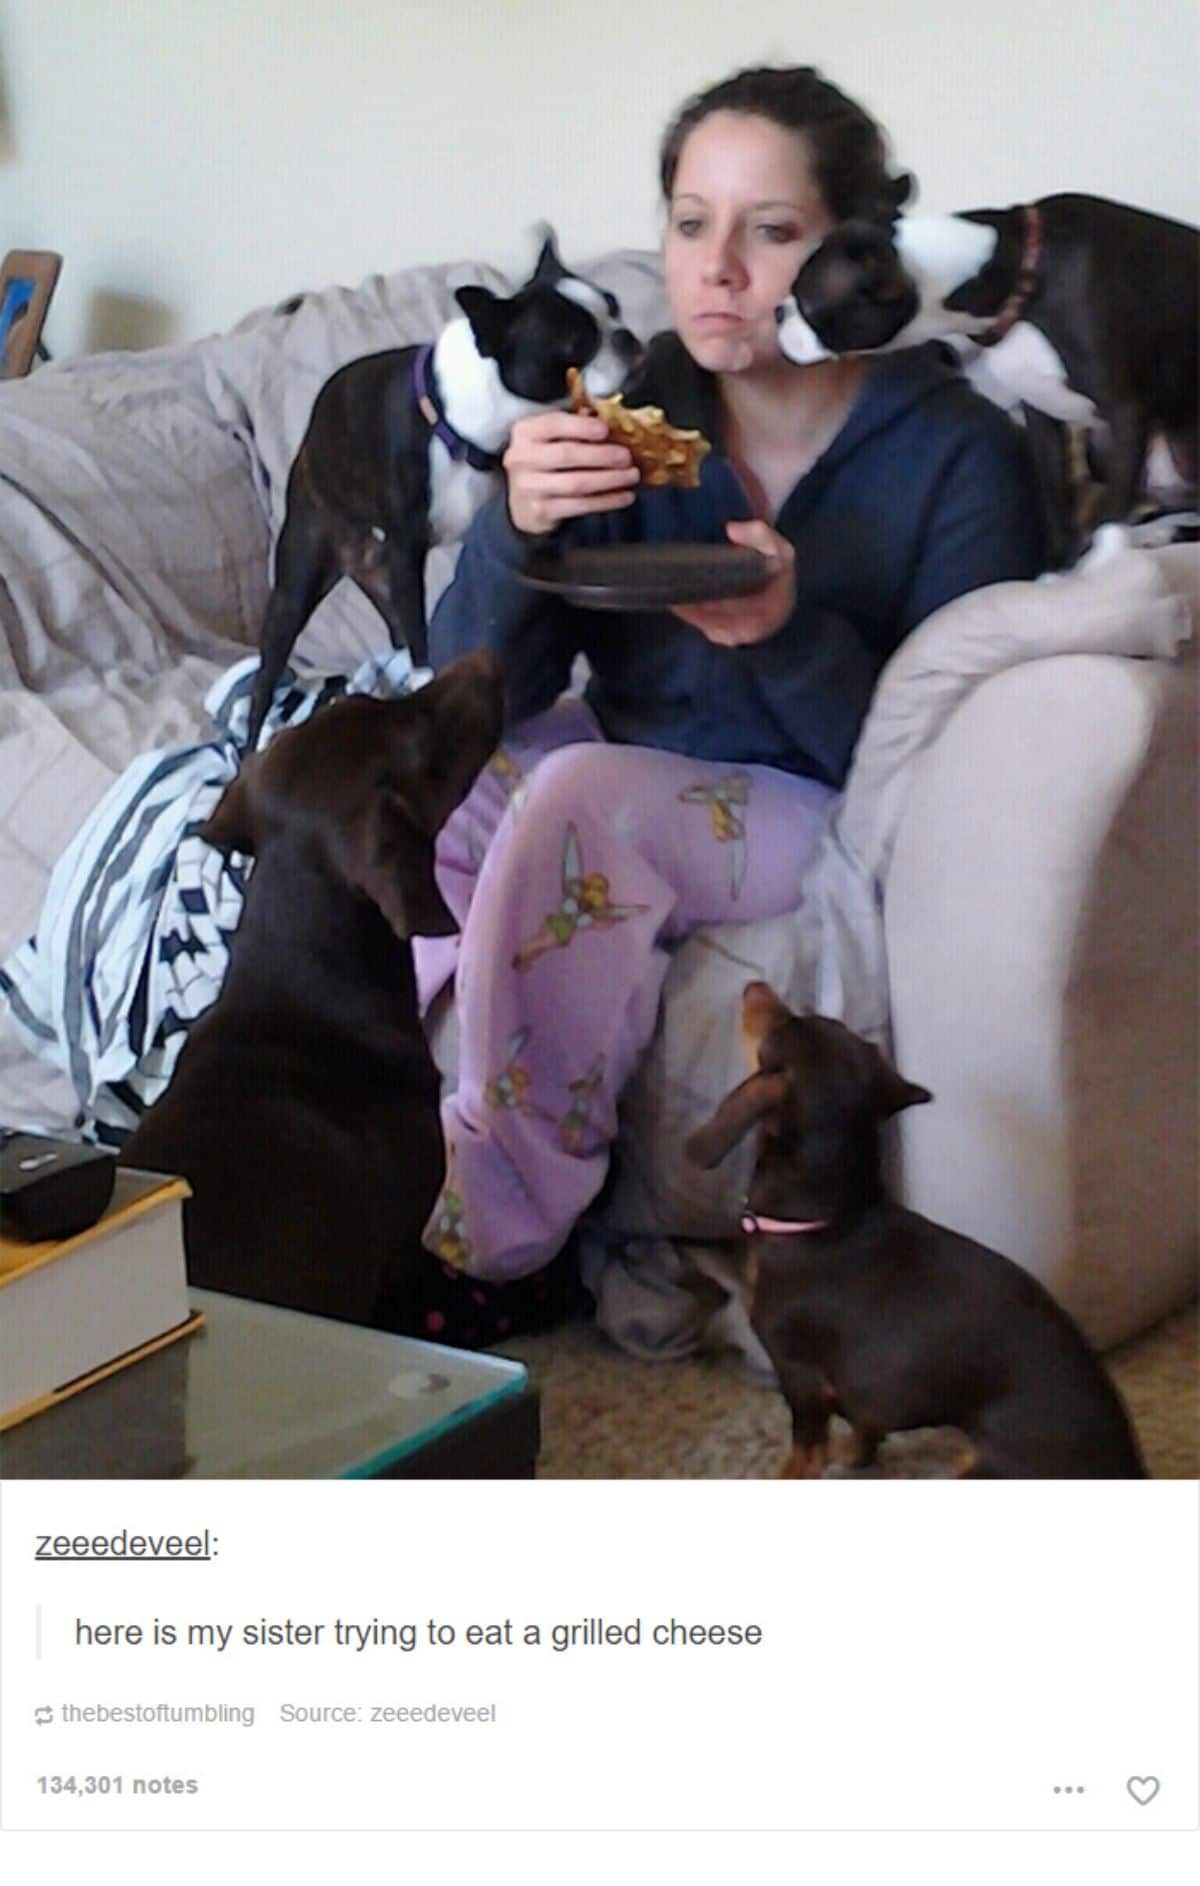 tumblr post of woman trying to eat grilled cheese with 2 black and white frnech bulldogs on either side and a brown dachshund by her feet